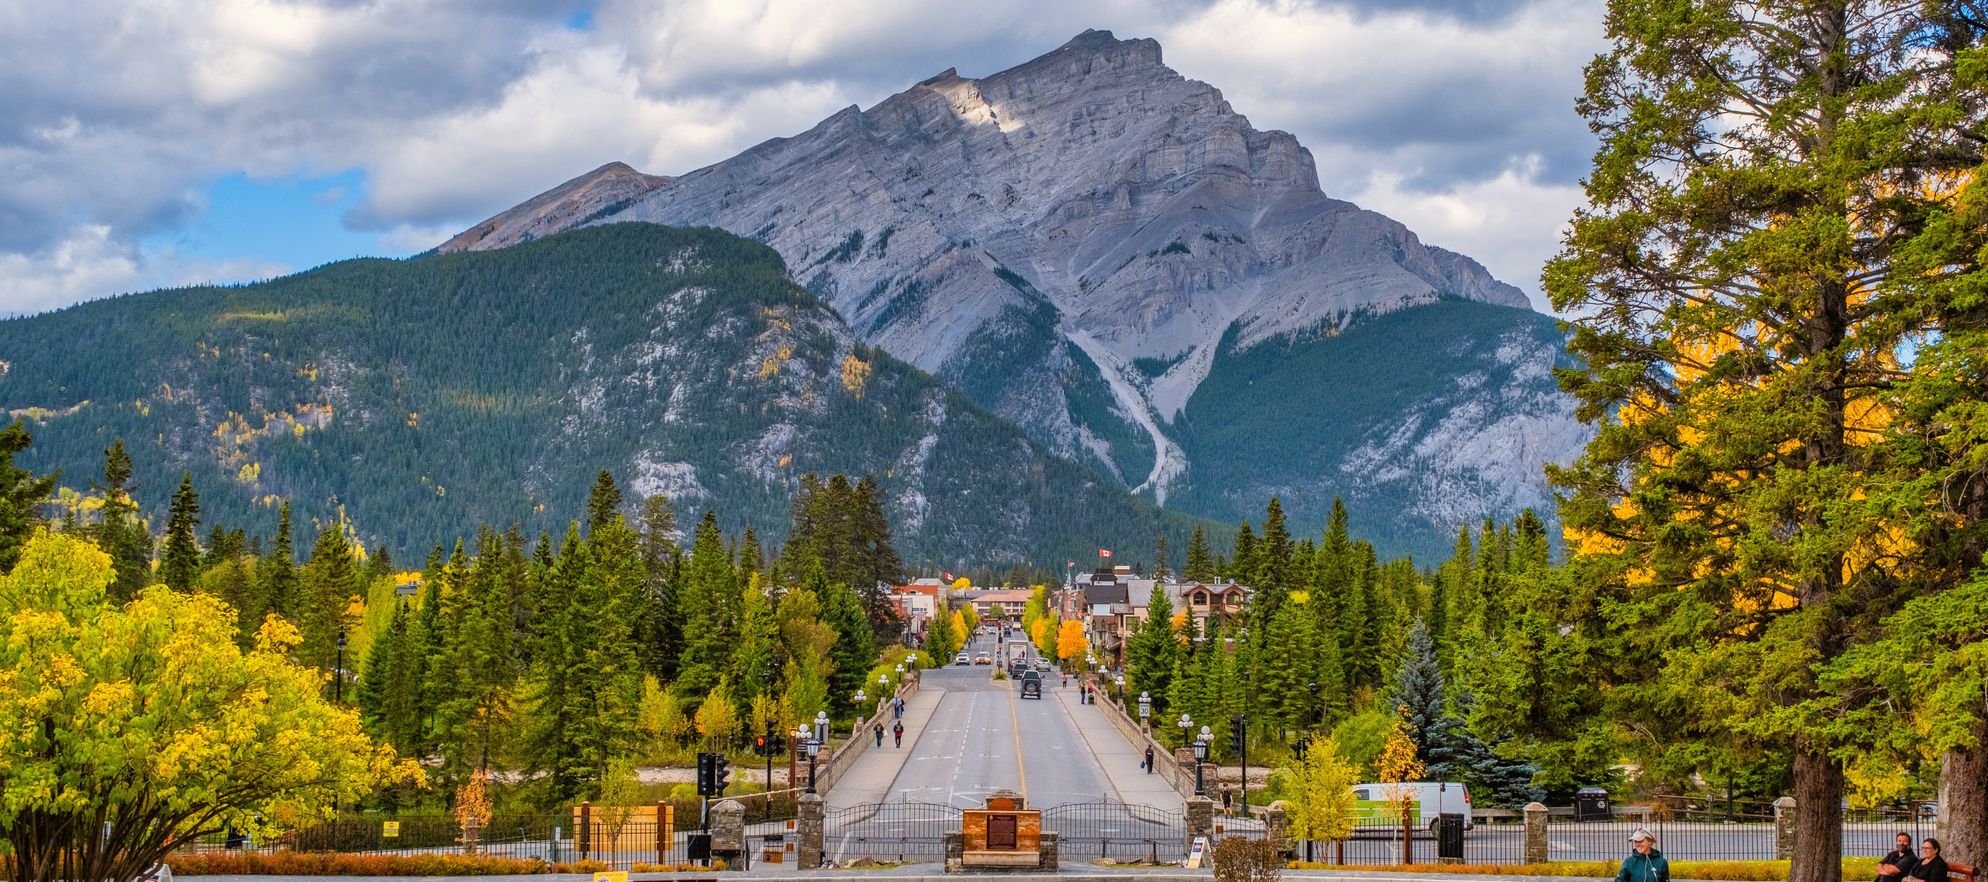 Banff Avenue in the summer